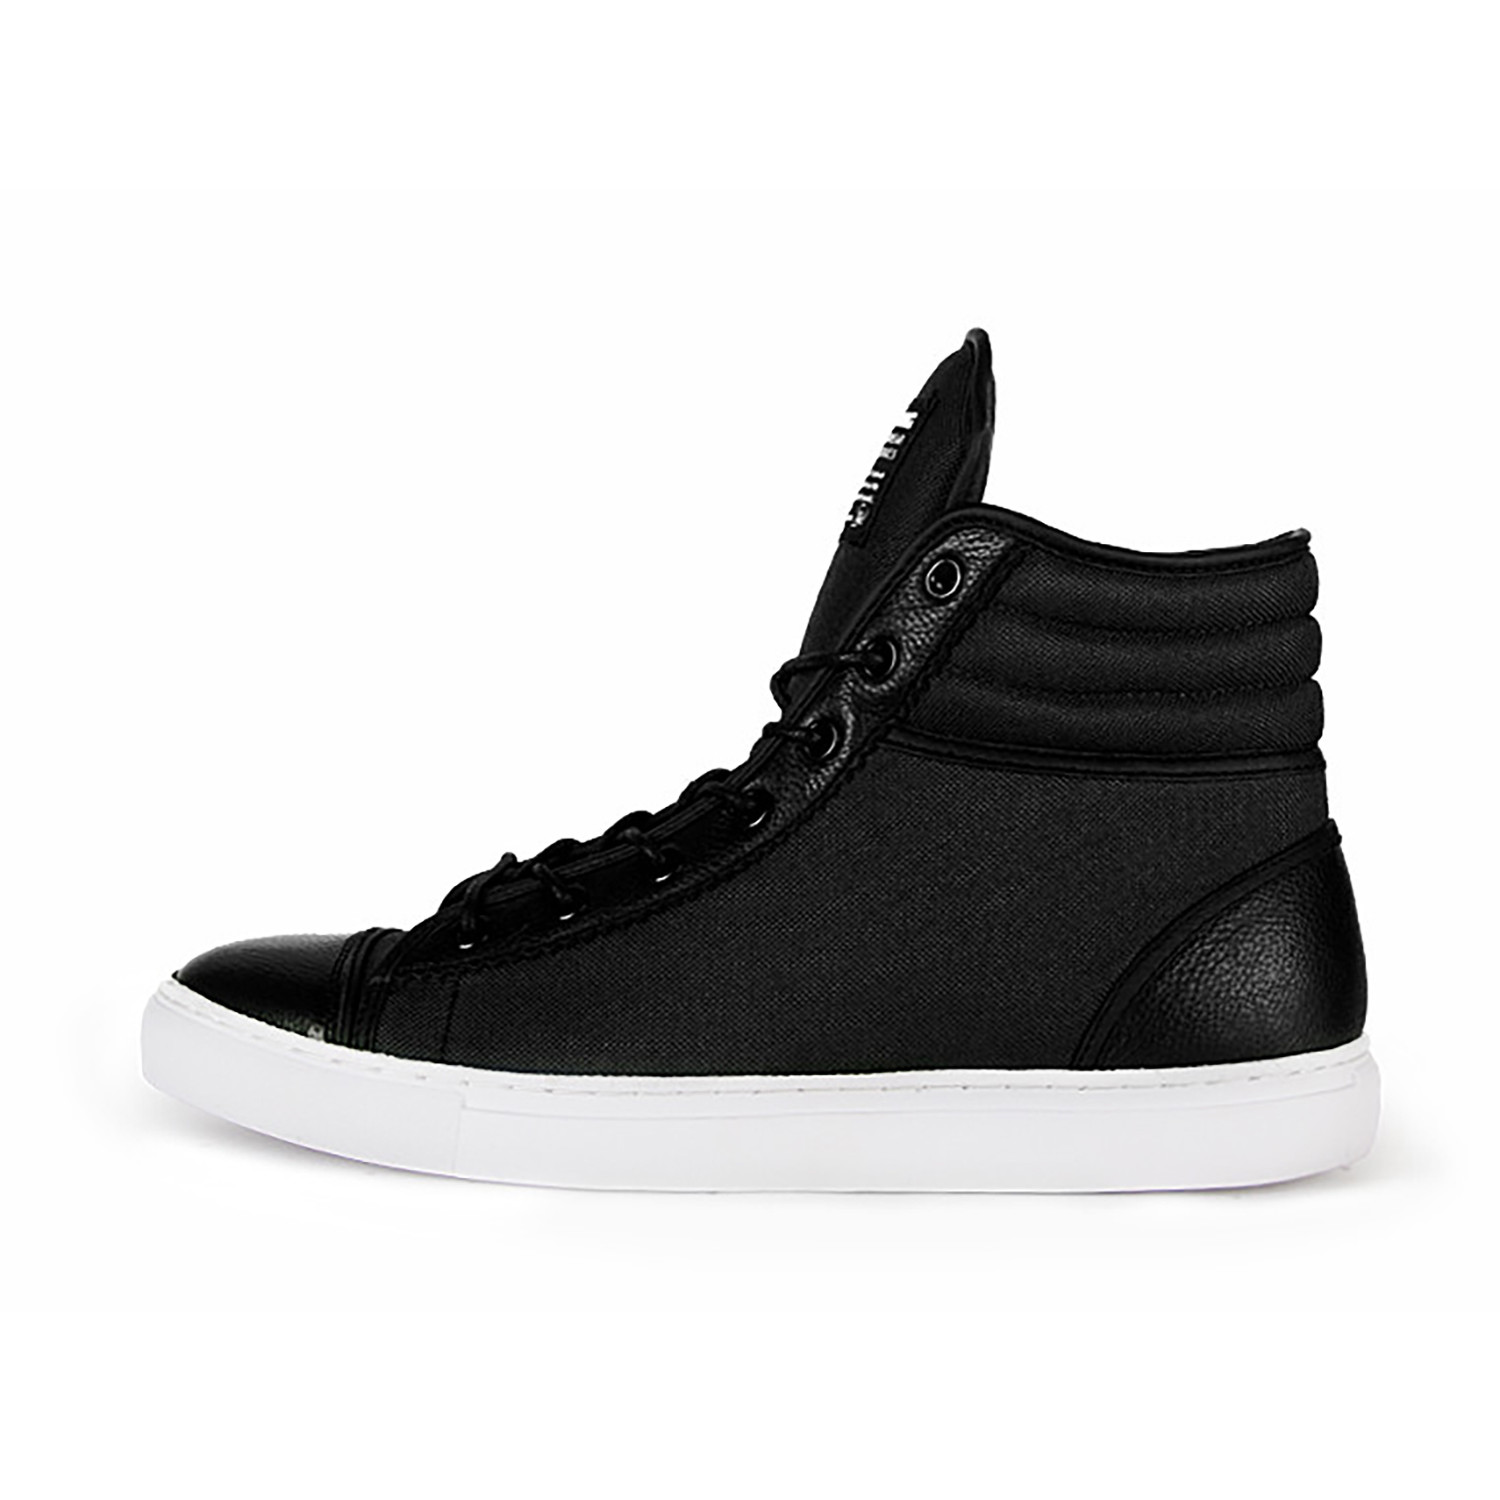 NYLO Sneaker // Black (US: 8) - Sully Wong - Touch of Modern